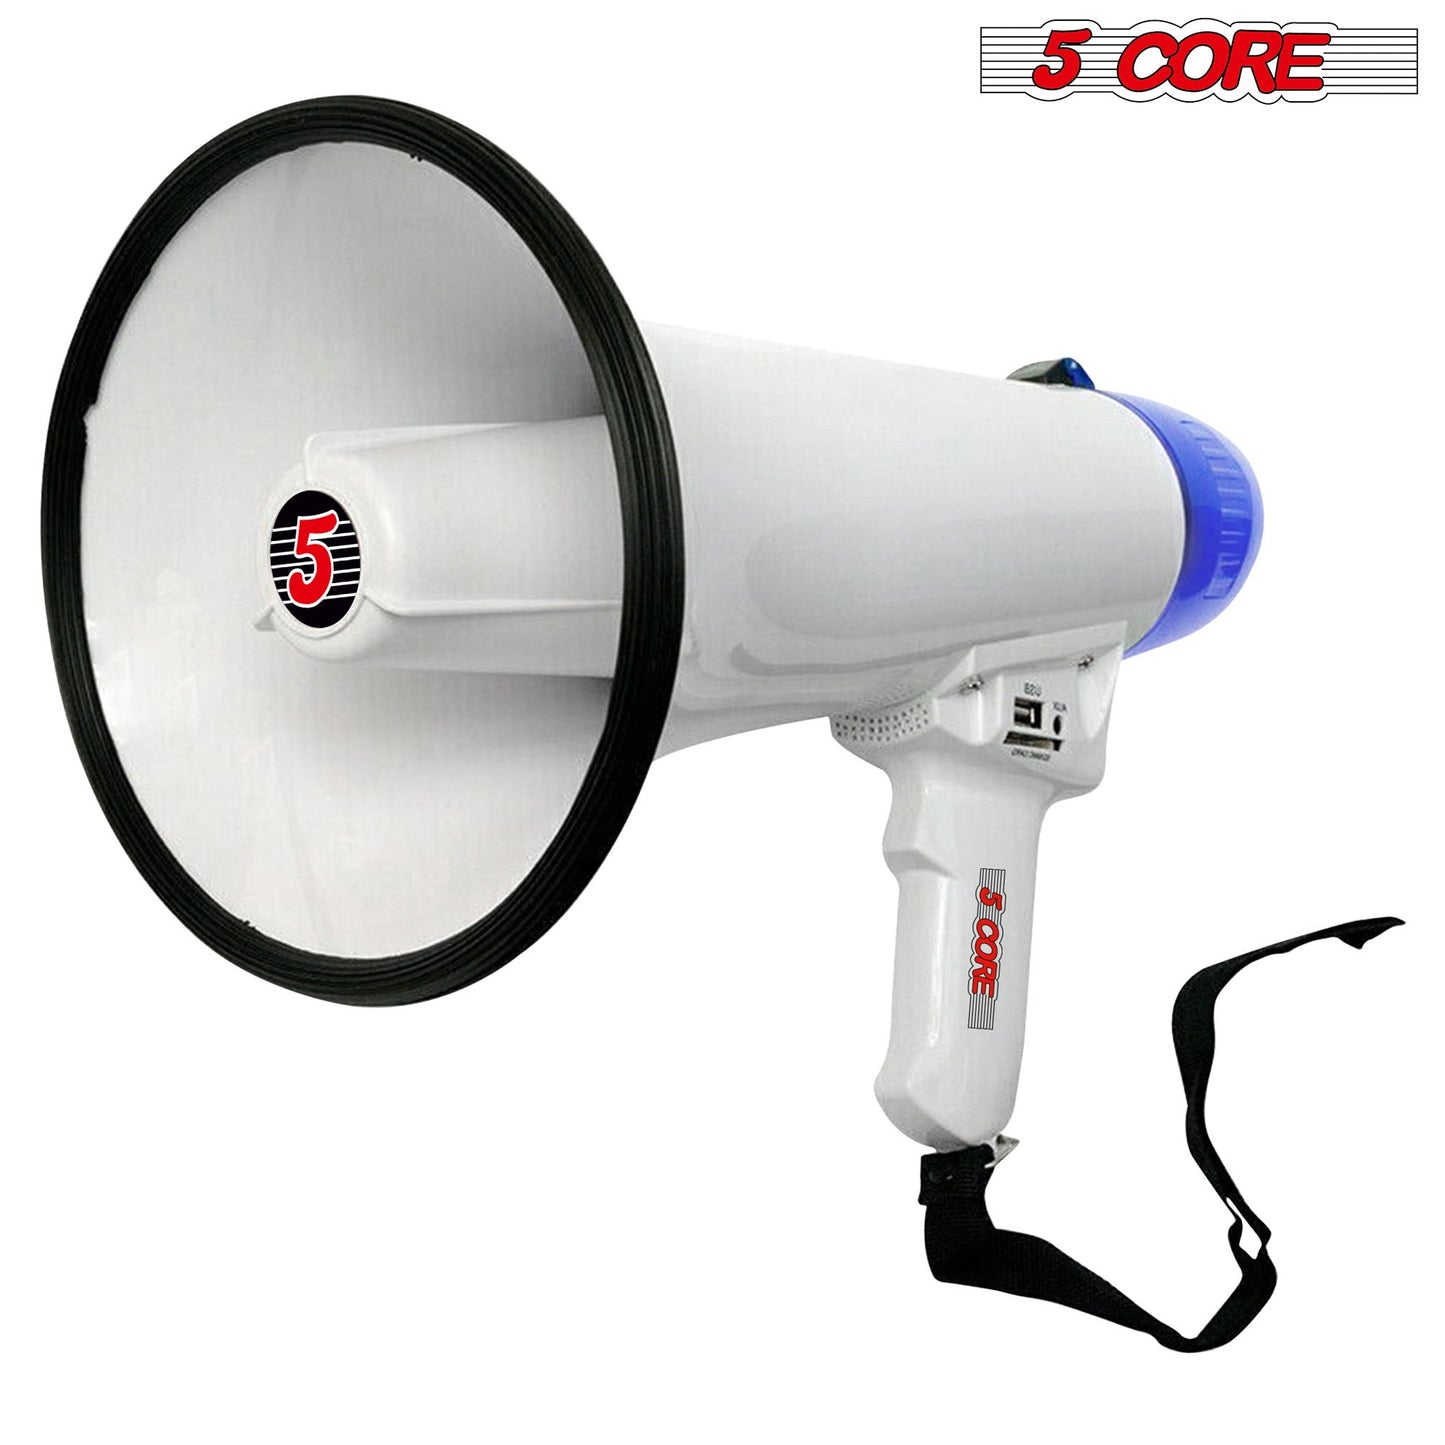 20 Watt Professional Megaphone 2 pack Clear & Far Reaching Sound- Multi-Function with, Recording, Siren, Volume Control|Indoor & Outdoor Sports, Emergency Response - 20R-USB WoB